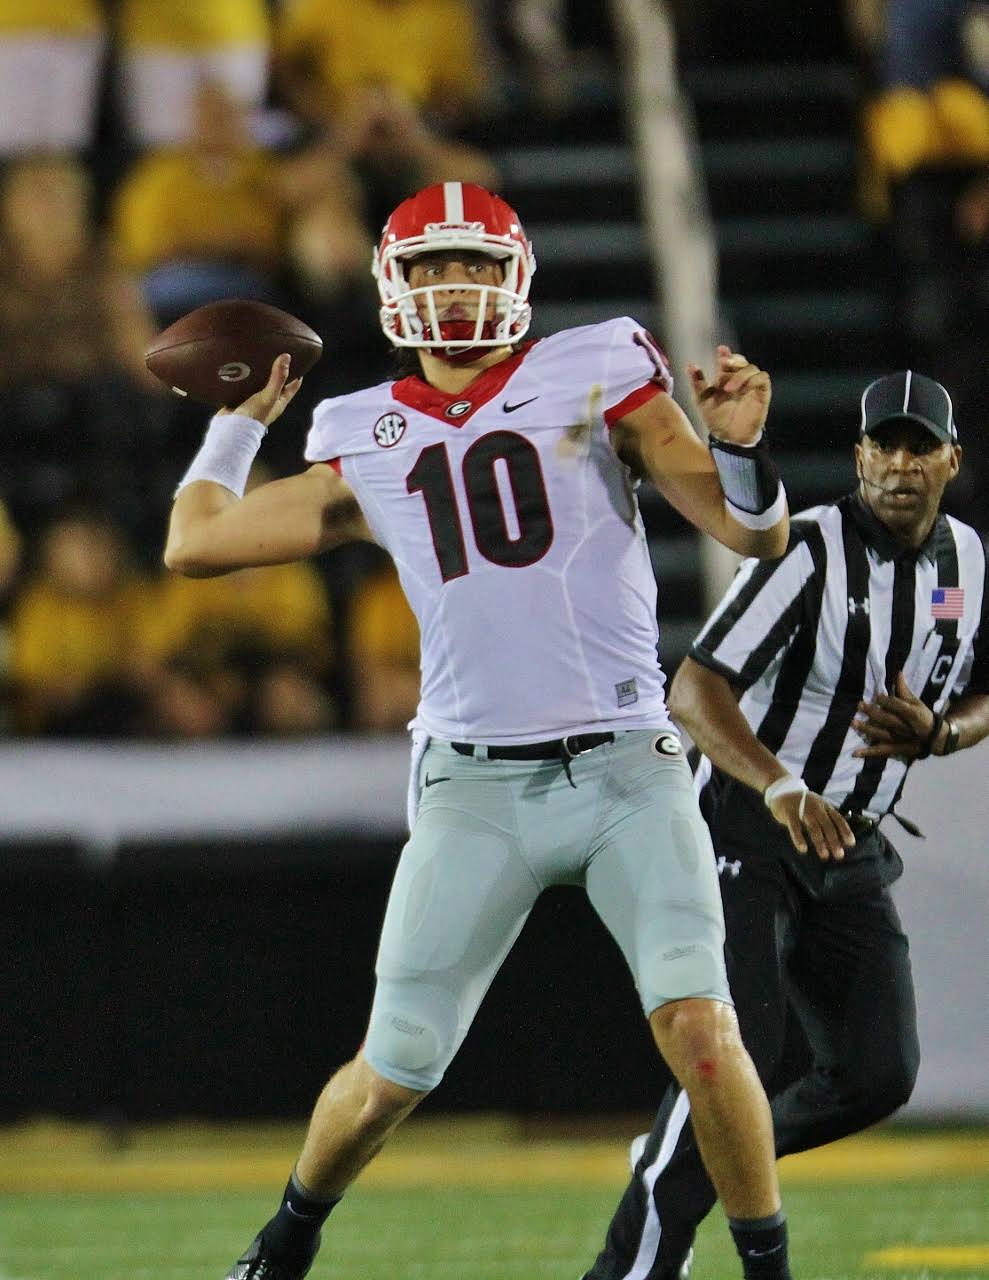 Jacob Eason drops back to complete one of his 55 pass attempts. (photo by Rob Saye)